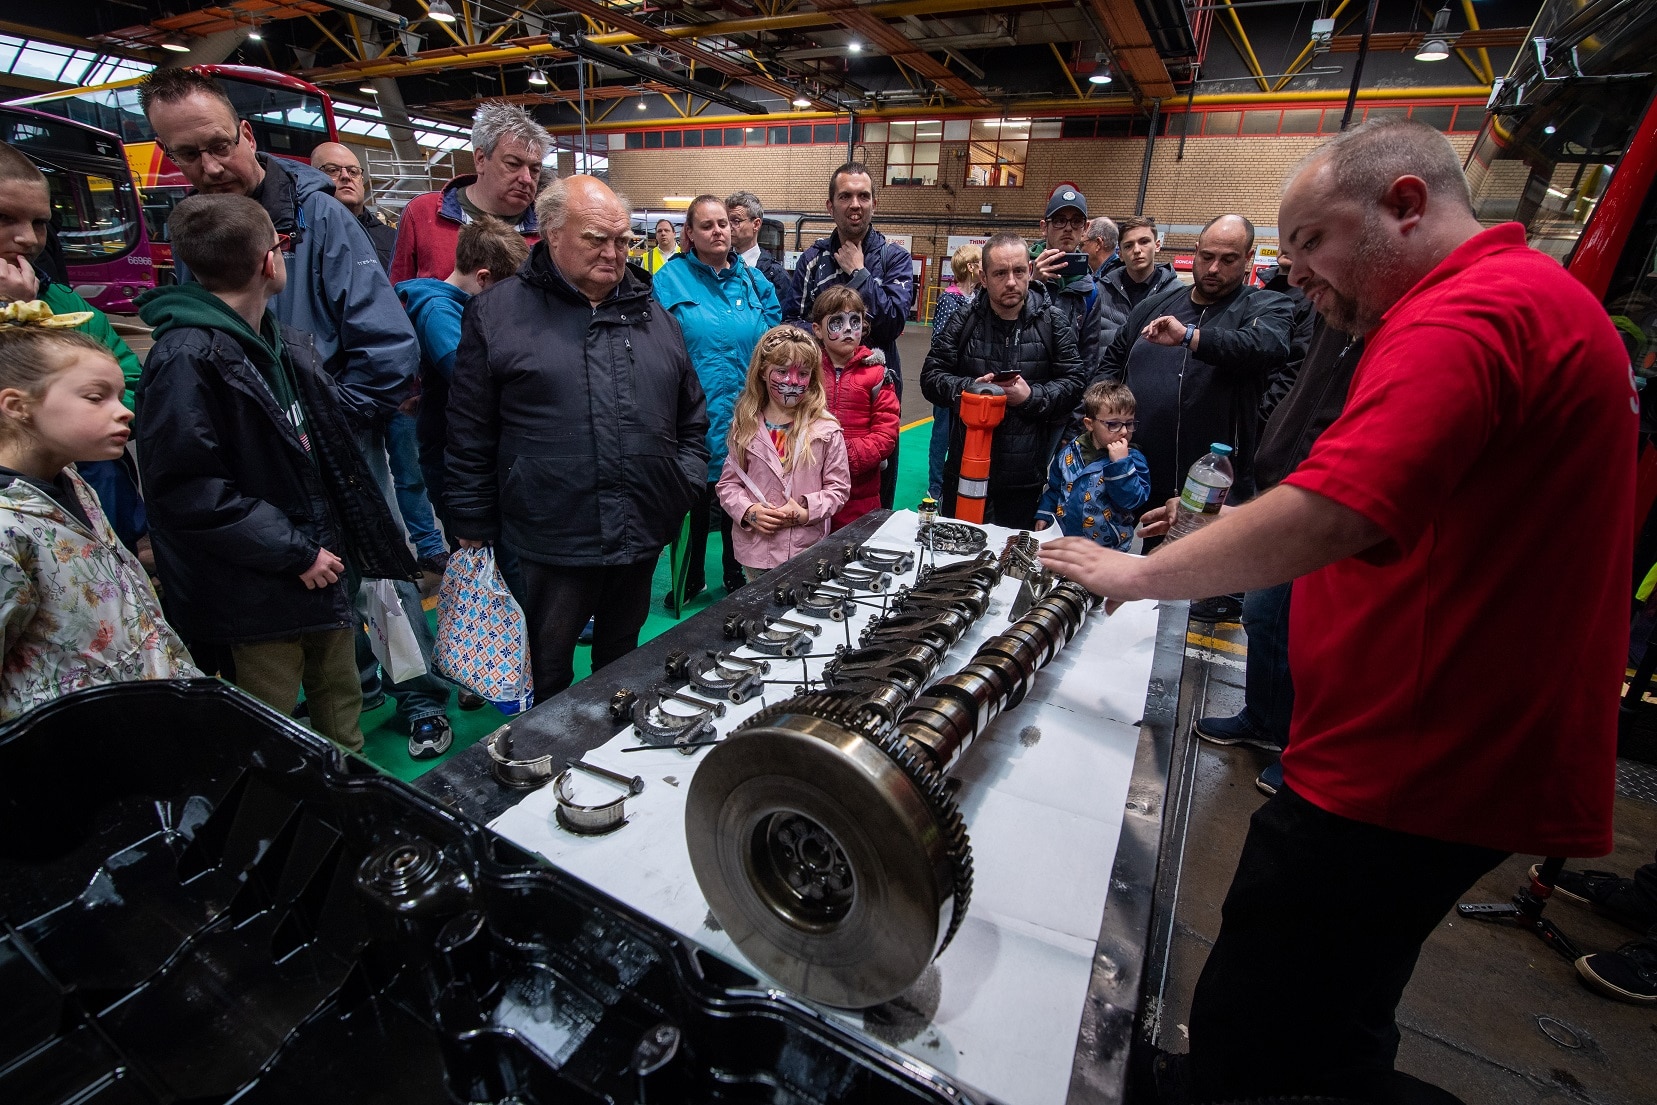 Visitors view engine components at the First Doncaster charity open day